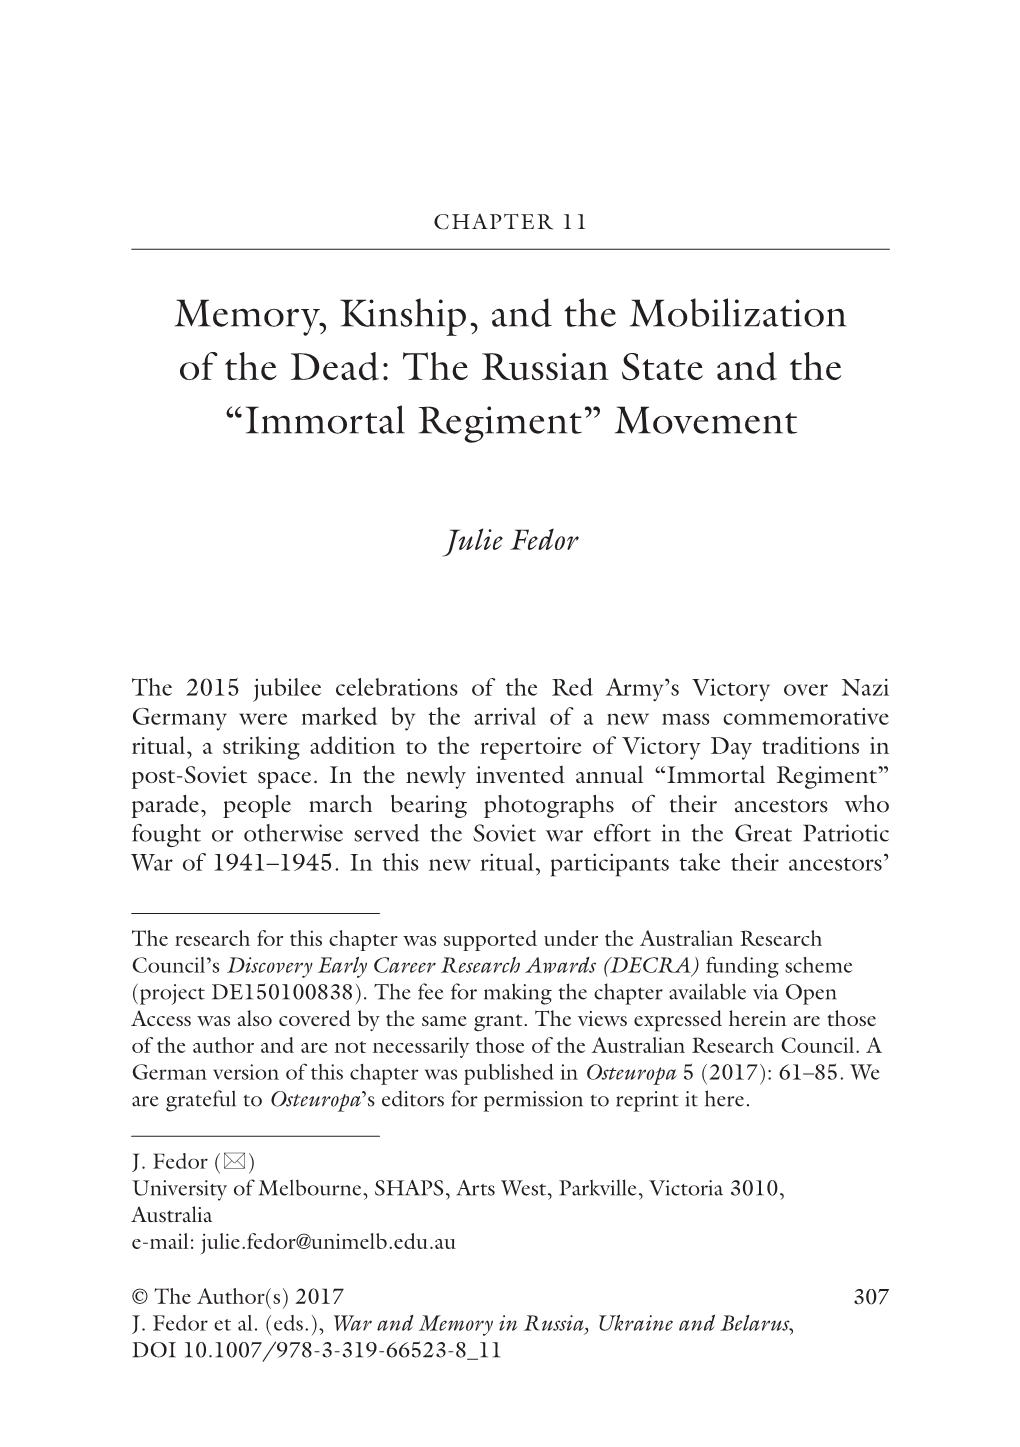 Memory, Kinship, and the Mobilization of the Dead: the Russian State and the “Immortal Regiment” Movement